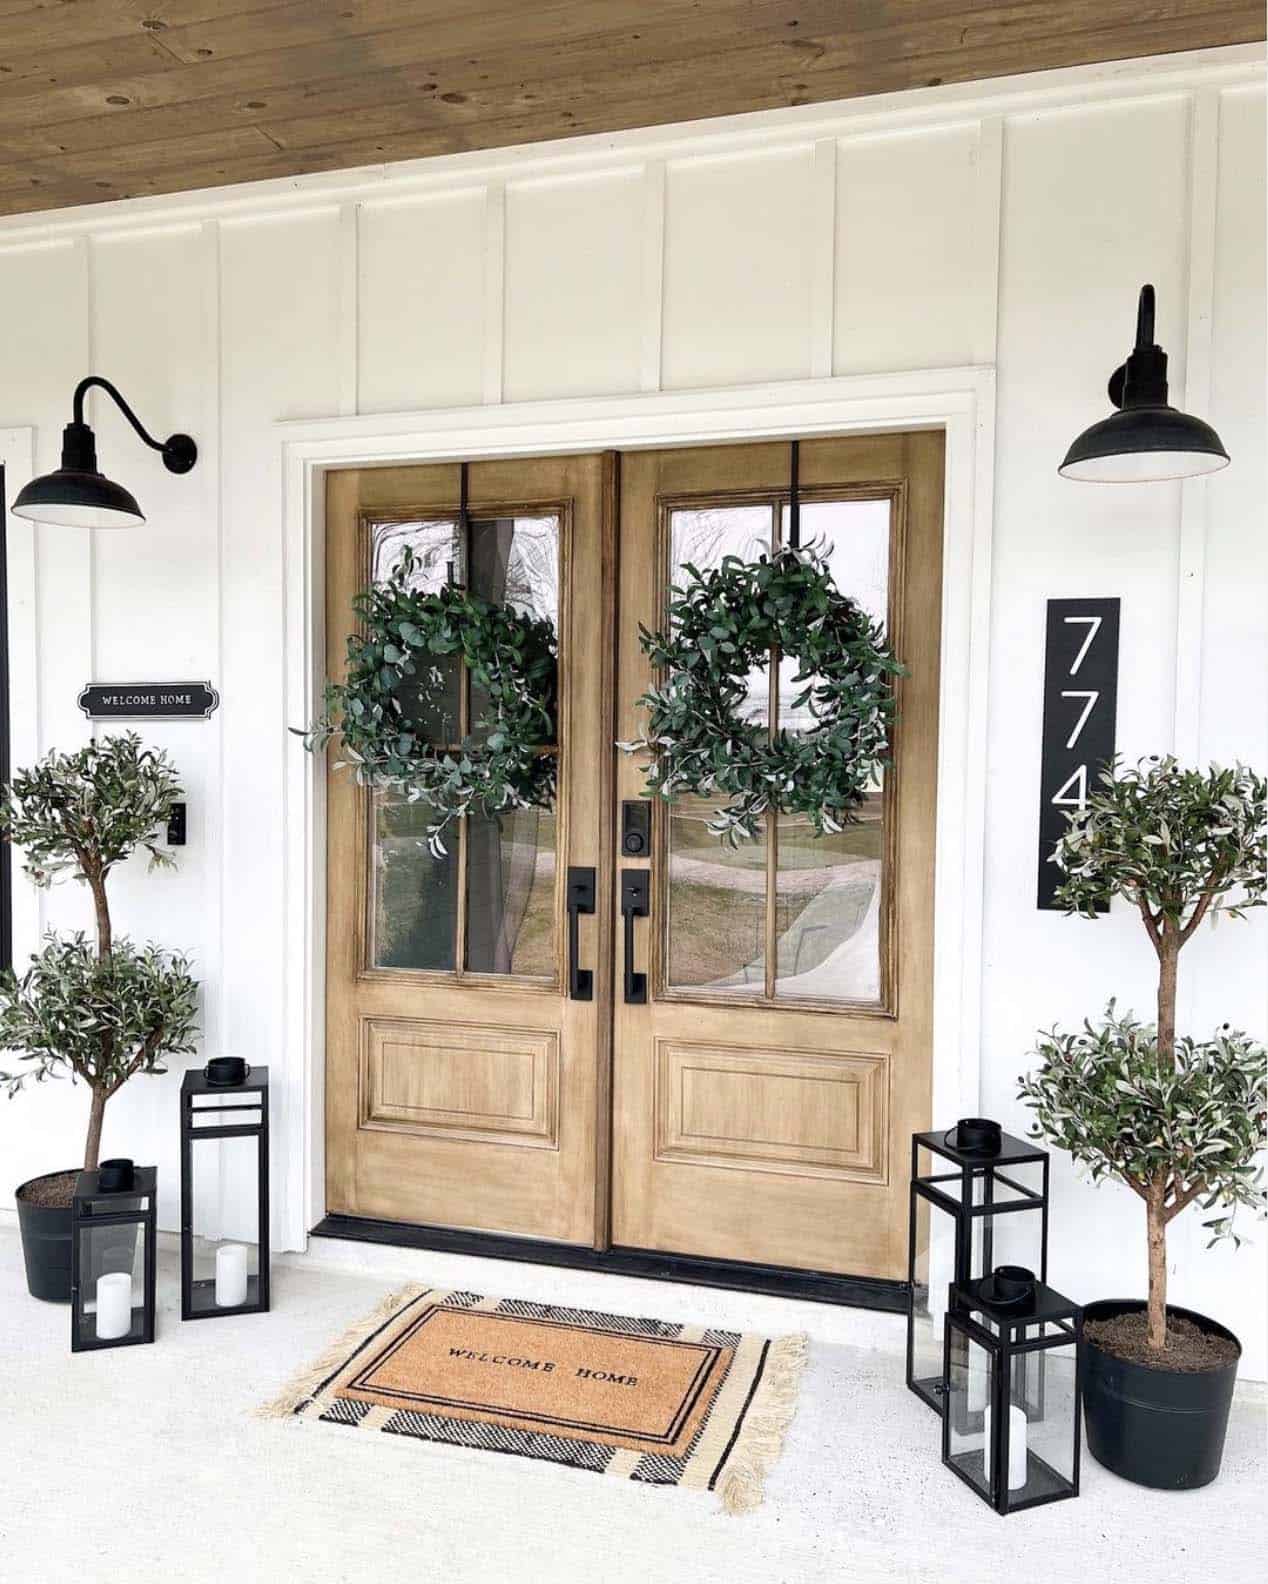 Spring porch with double olive topiary trees